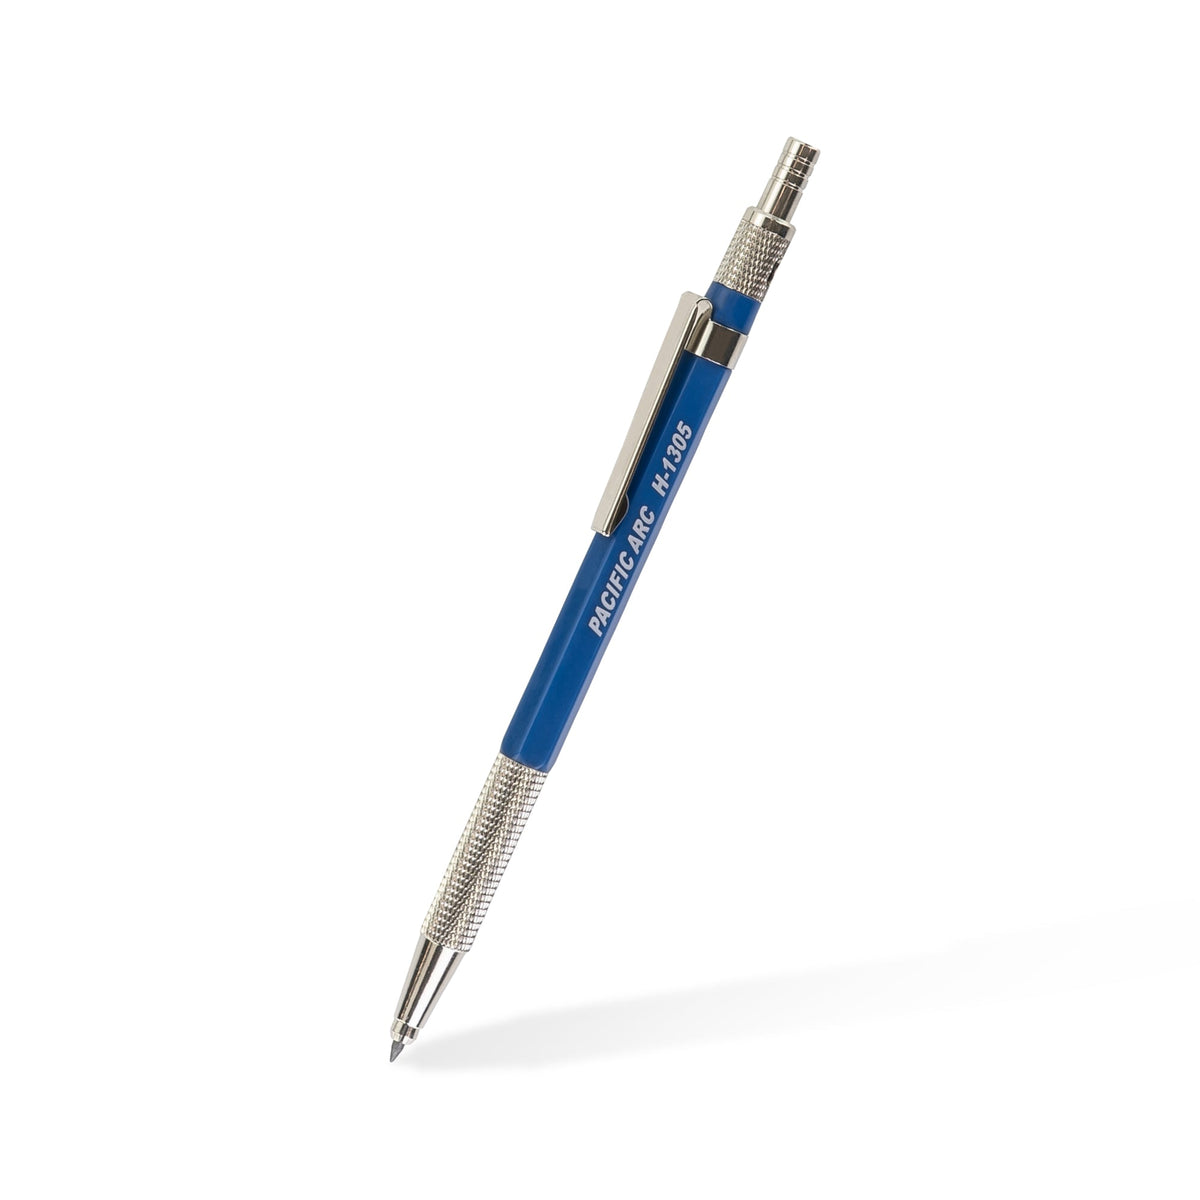 Pacific Arc, 2mm Lead Holder and Lead Sharpener, Blue Drafting Pencil for Artist Drawing, Drafting, and Sketching